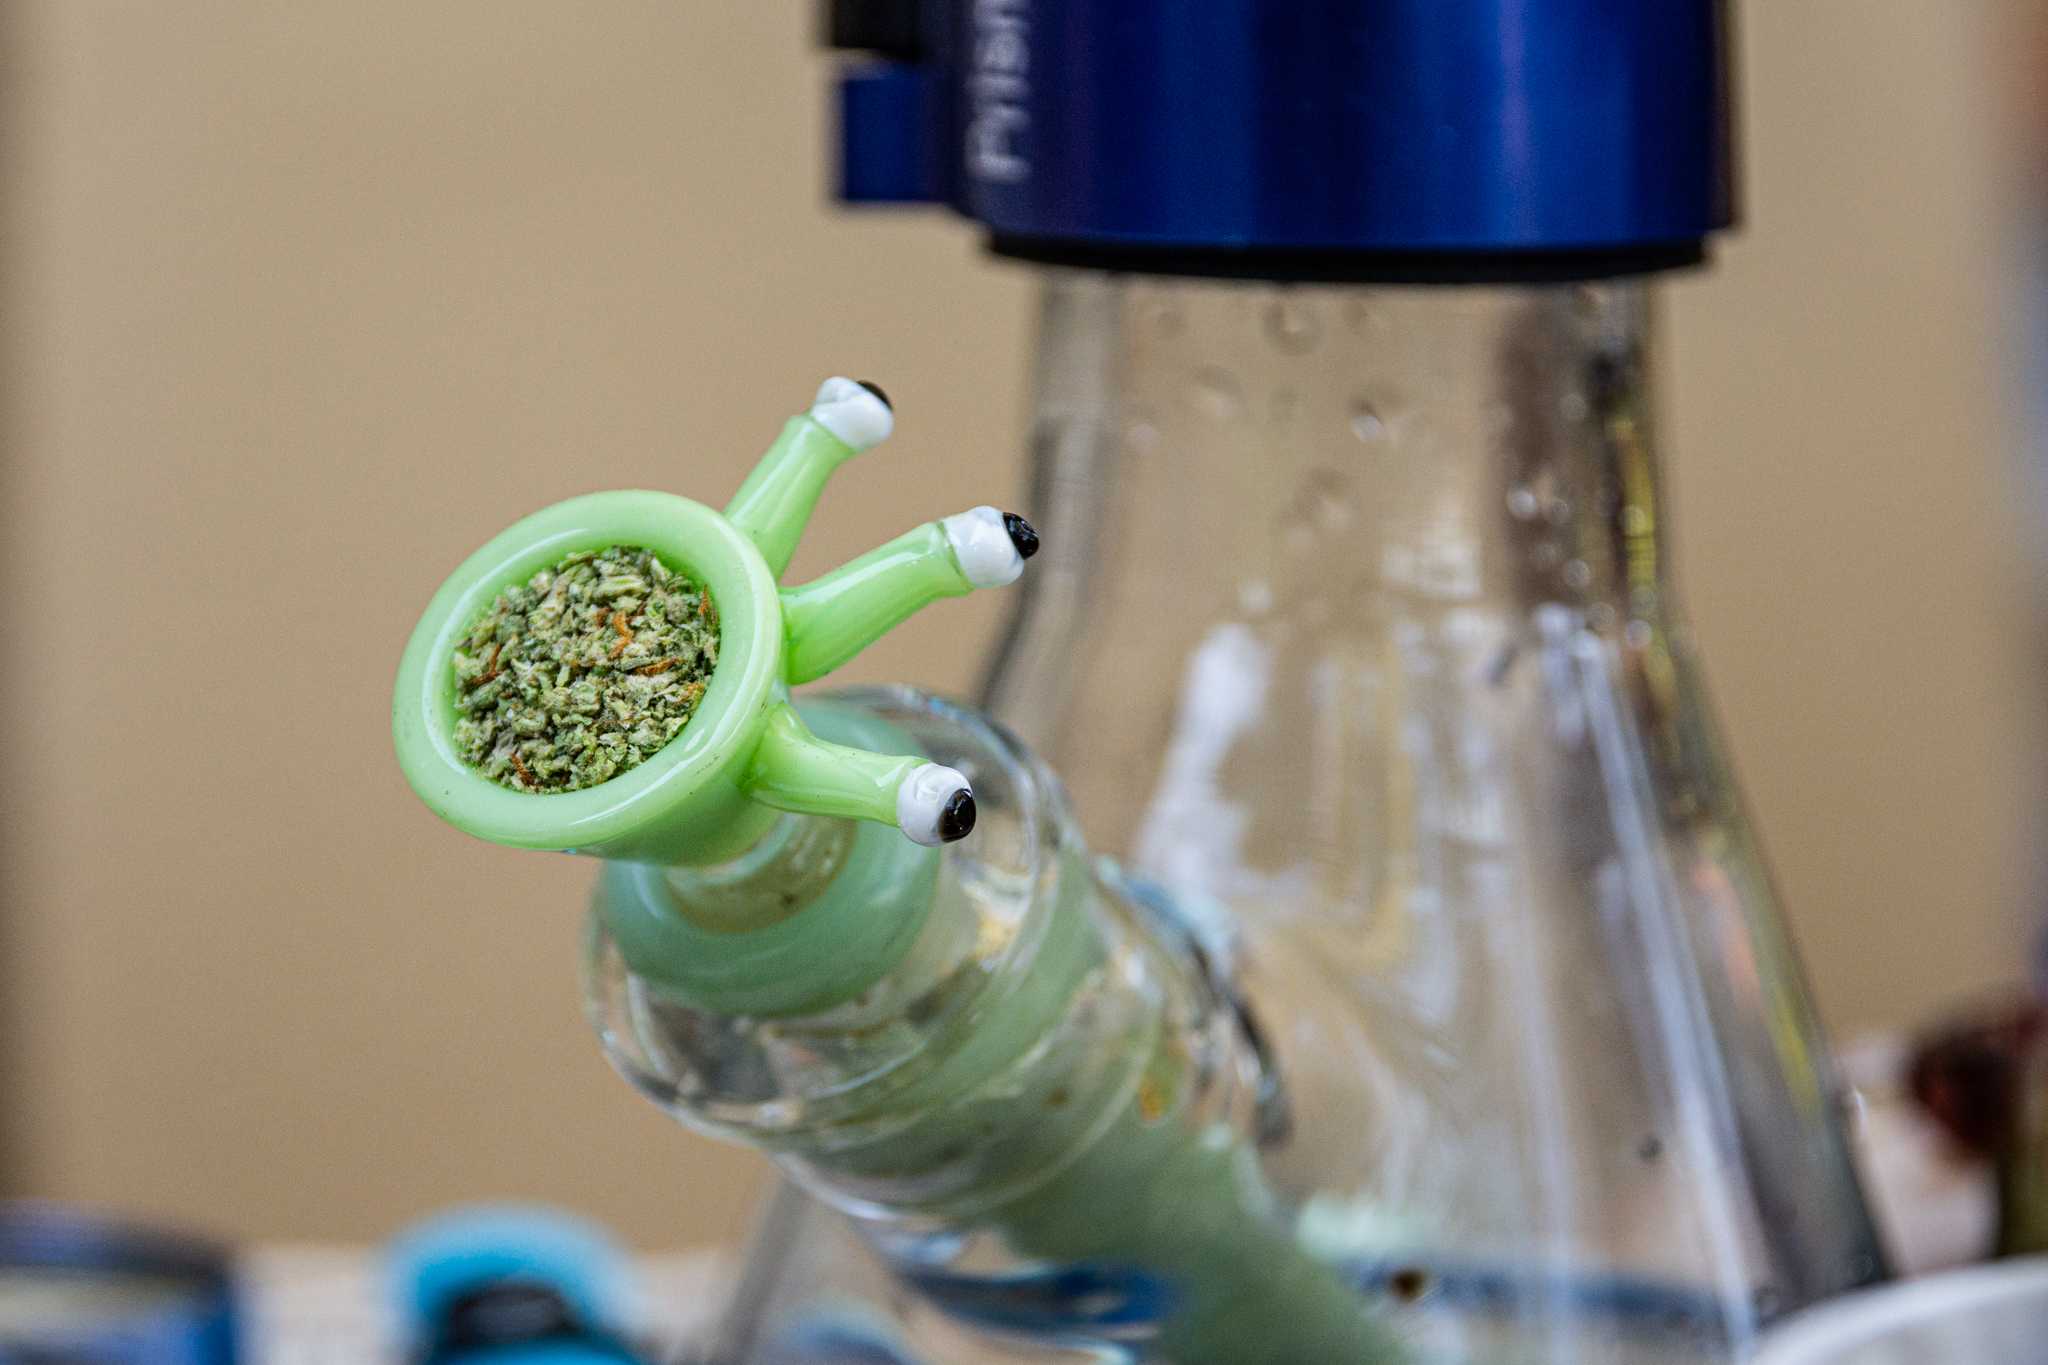 A bowl of cannabis sits on a bong